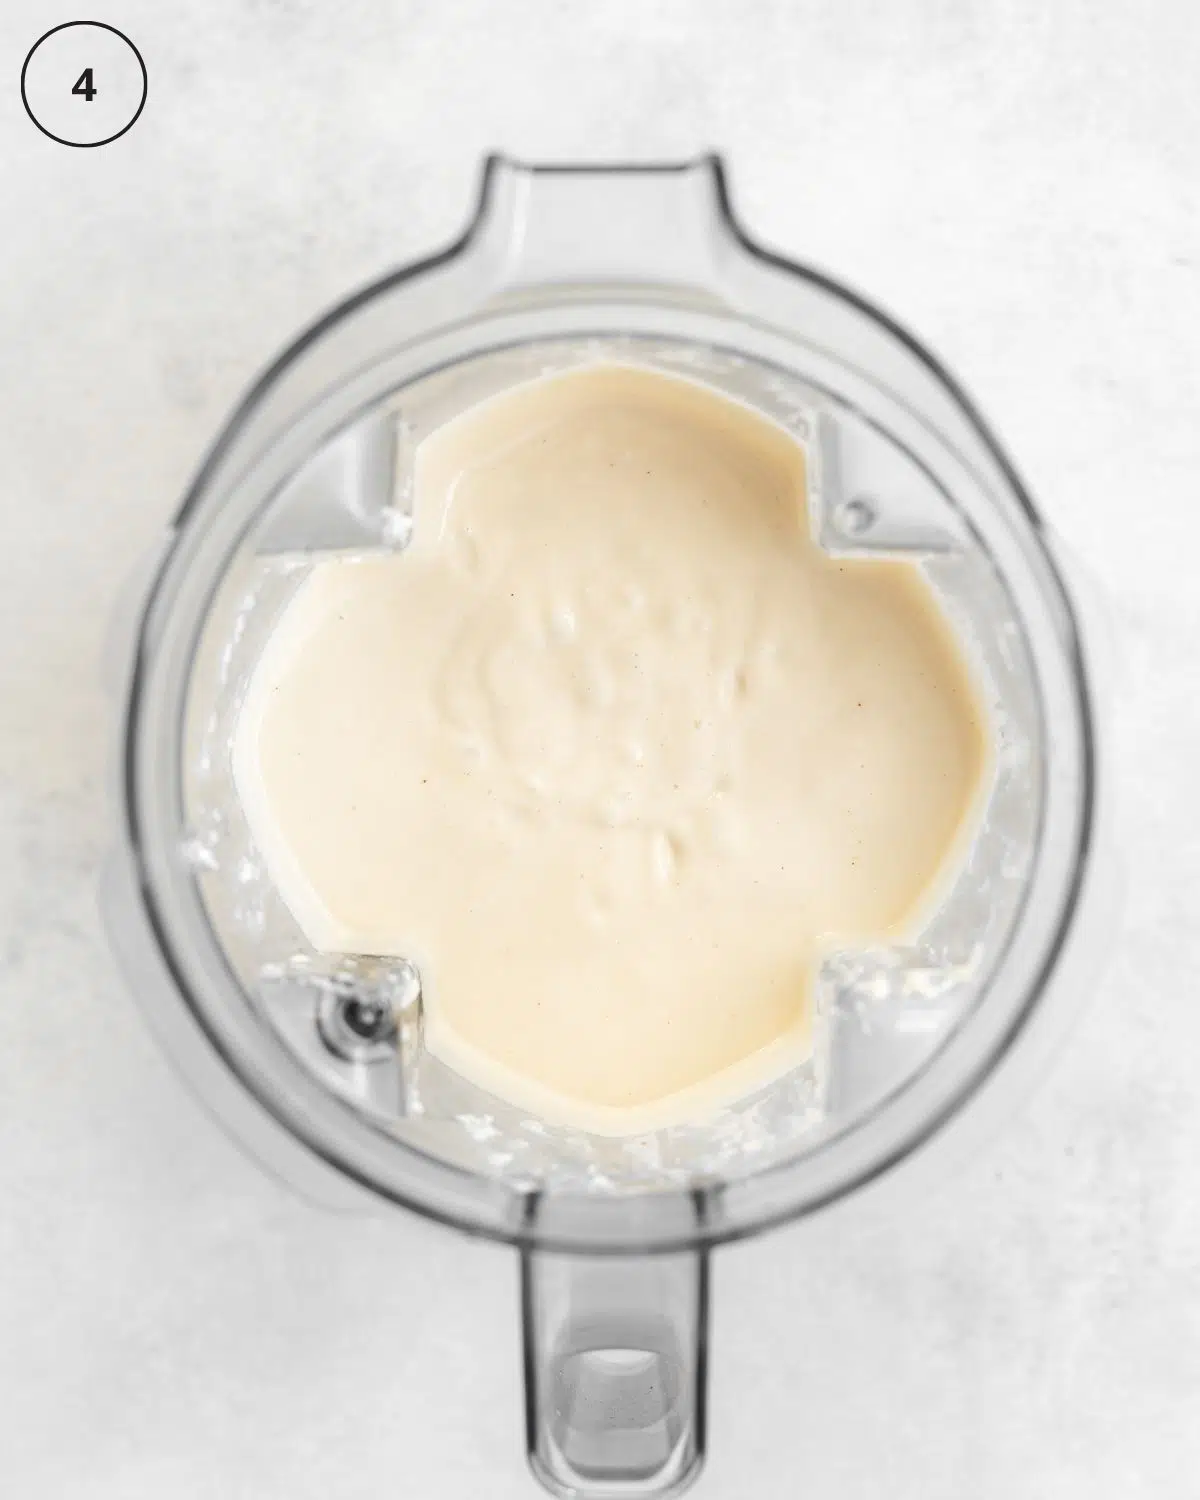 top down view of blender with cheesecake filling.